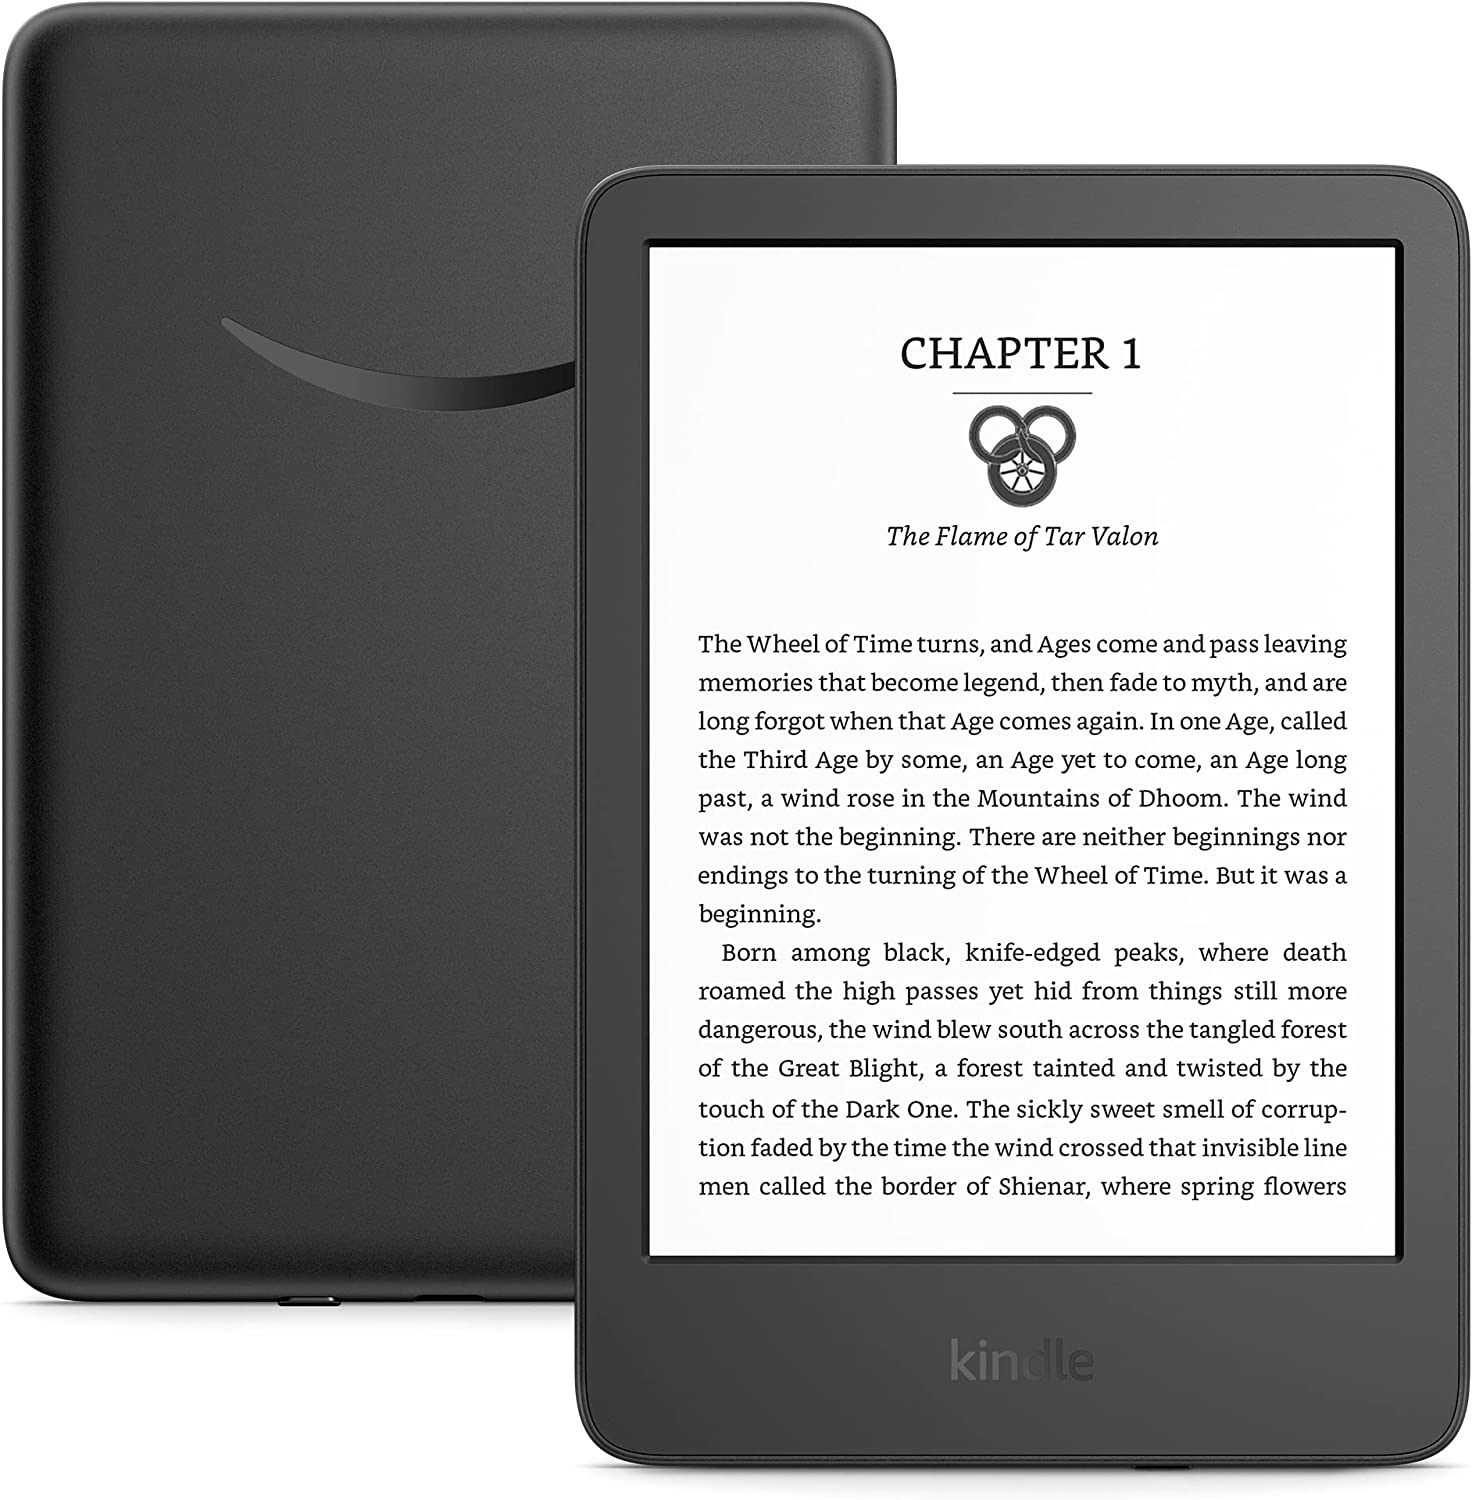 All-new Amazon Kindle 11th Generation (2022) – The lightest and most compact Kindle, now with a 6” 300 ppi high-resolution display, and 2x the storage